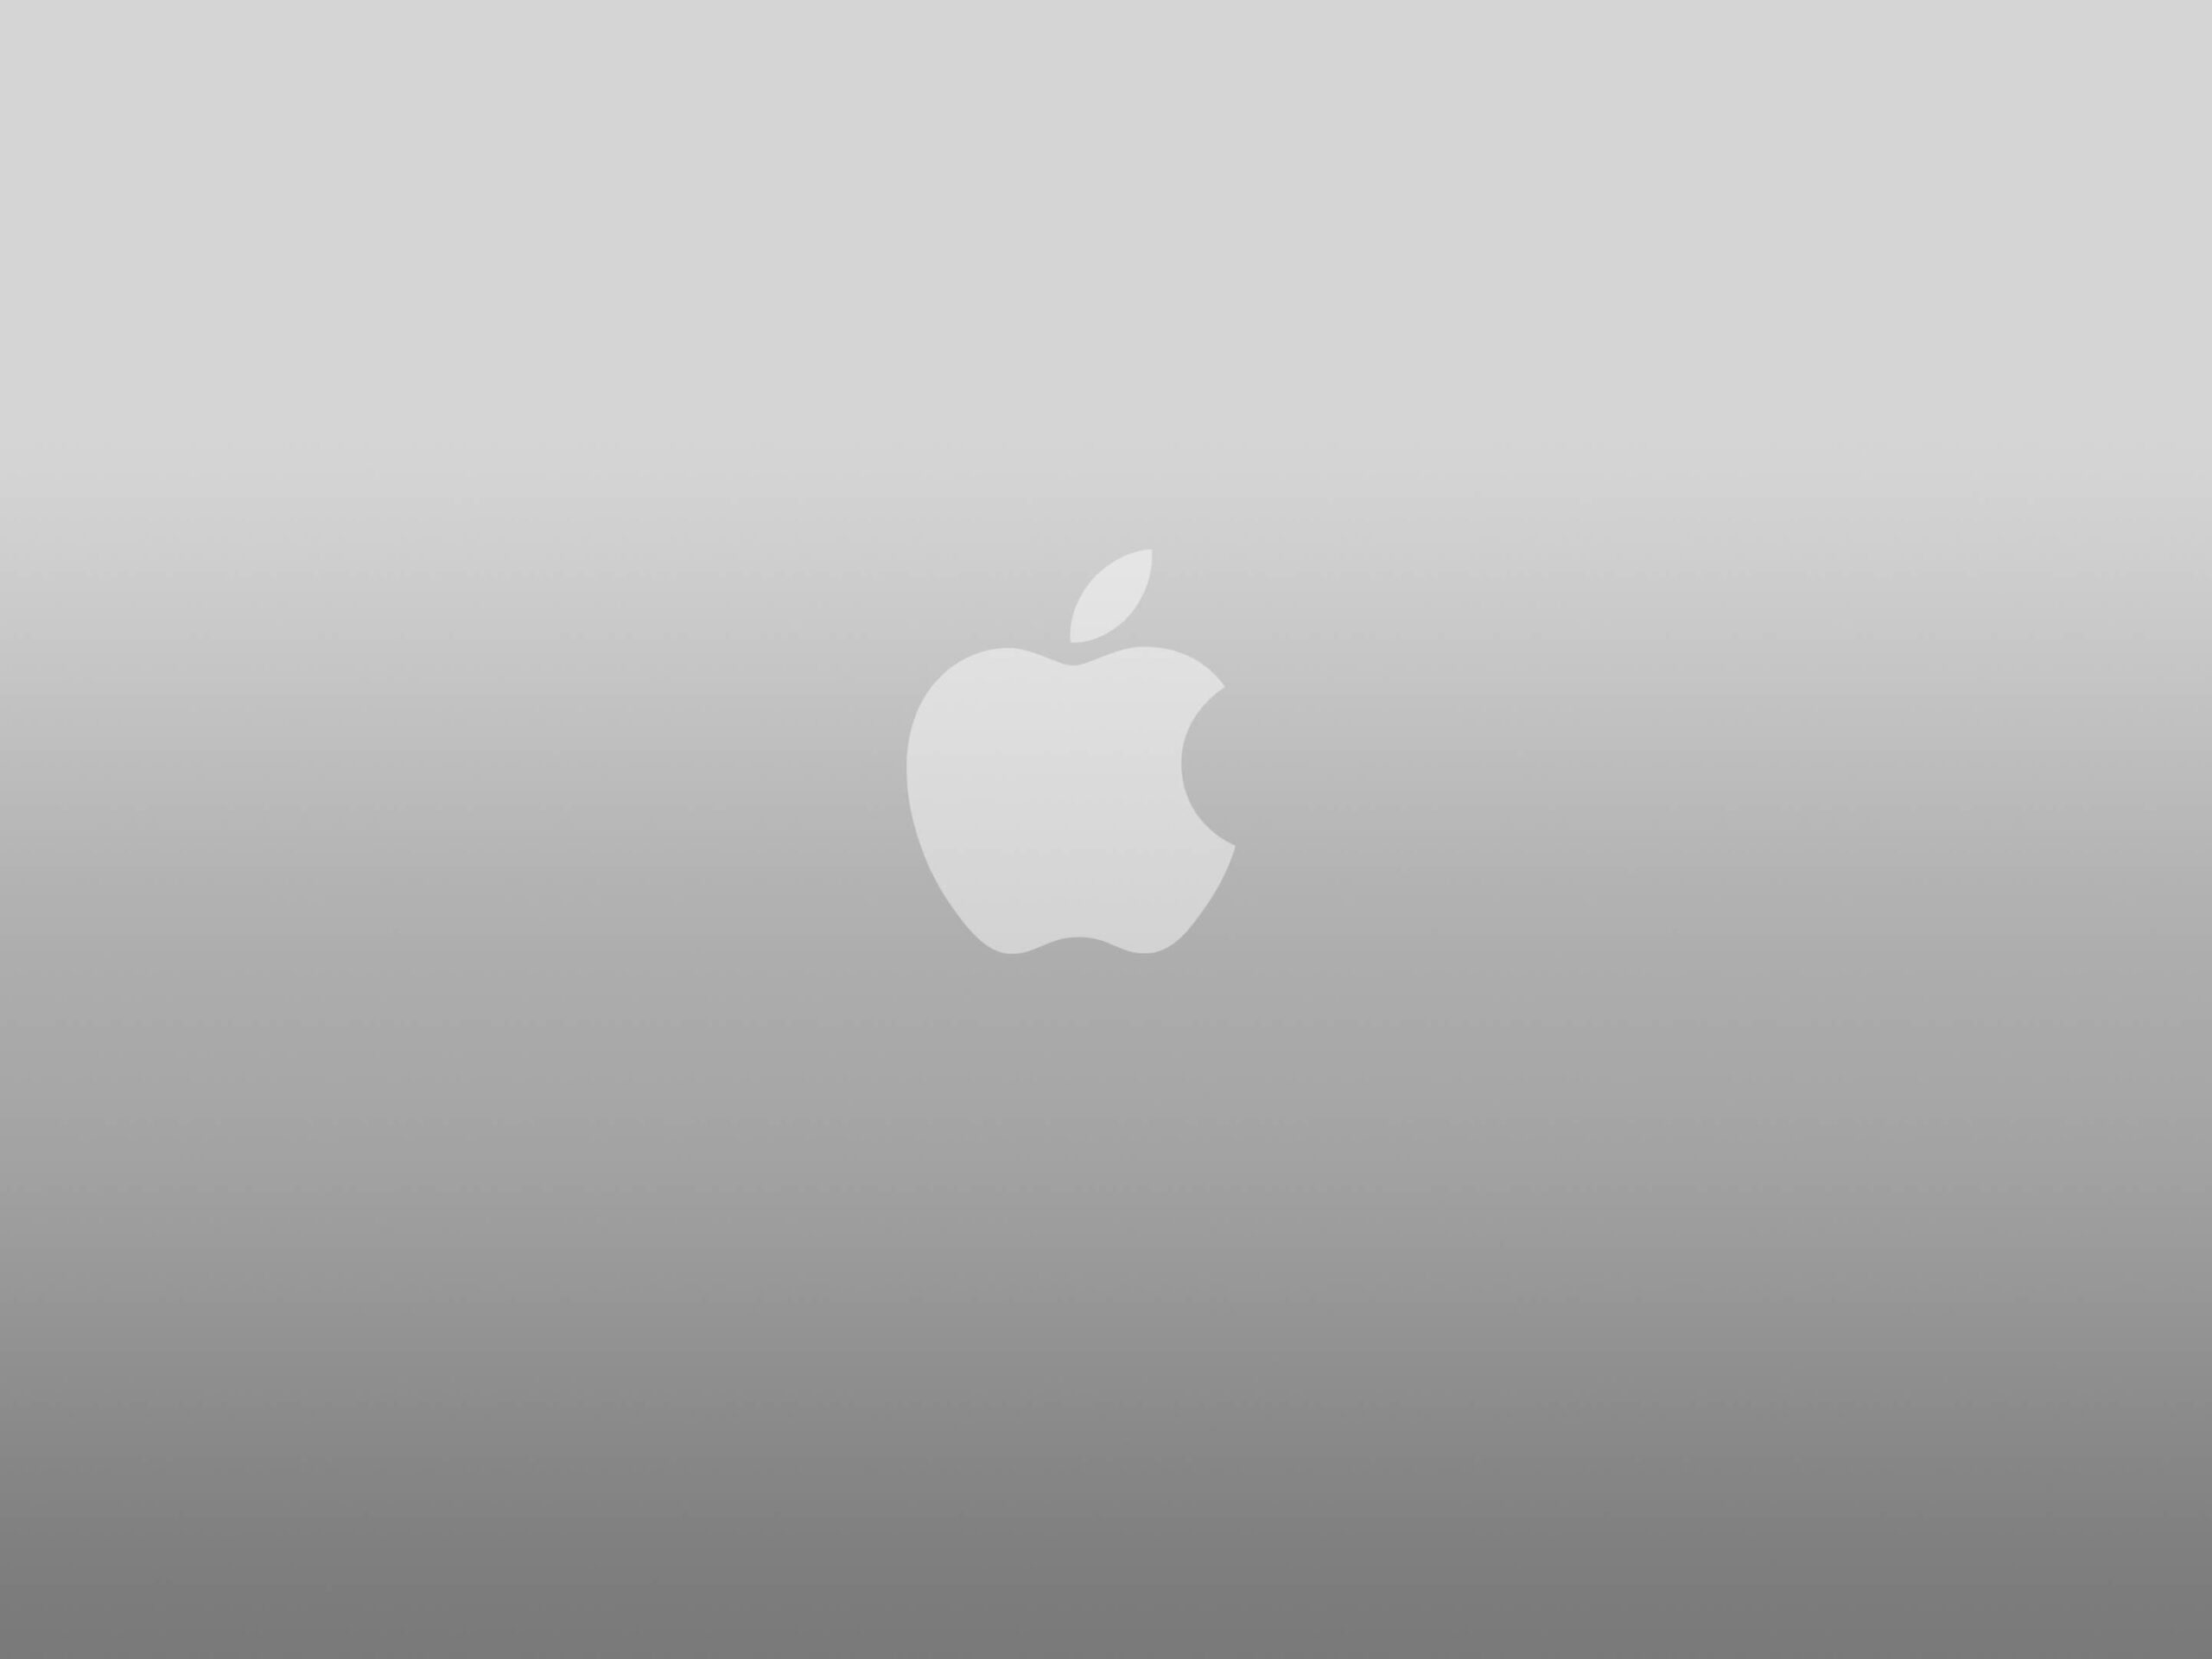 Apple Free 4K Wallpapers, Apple, Other